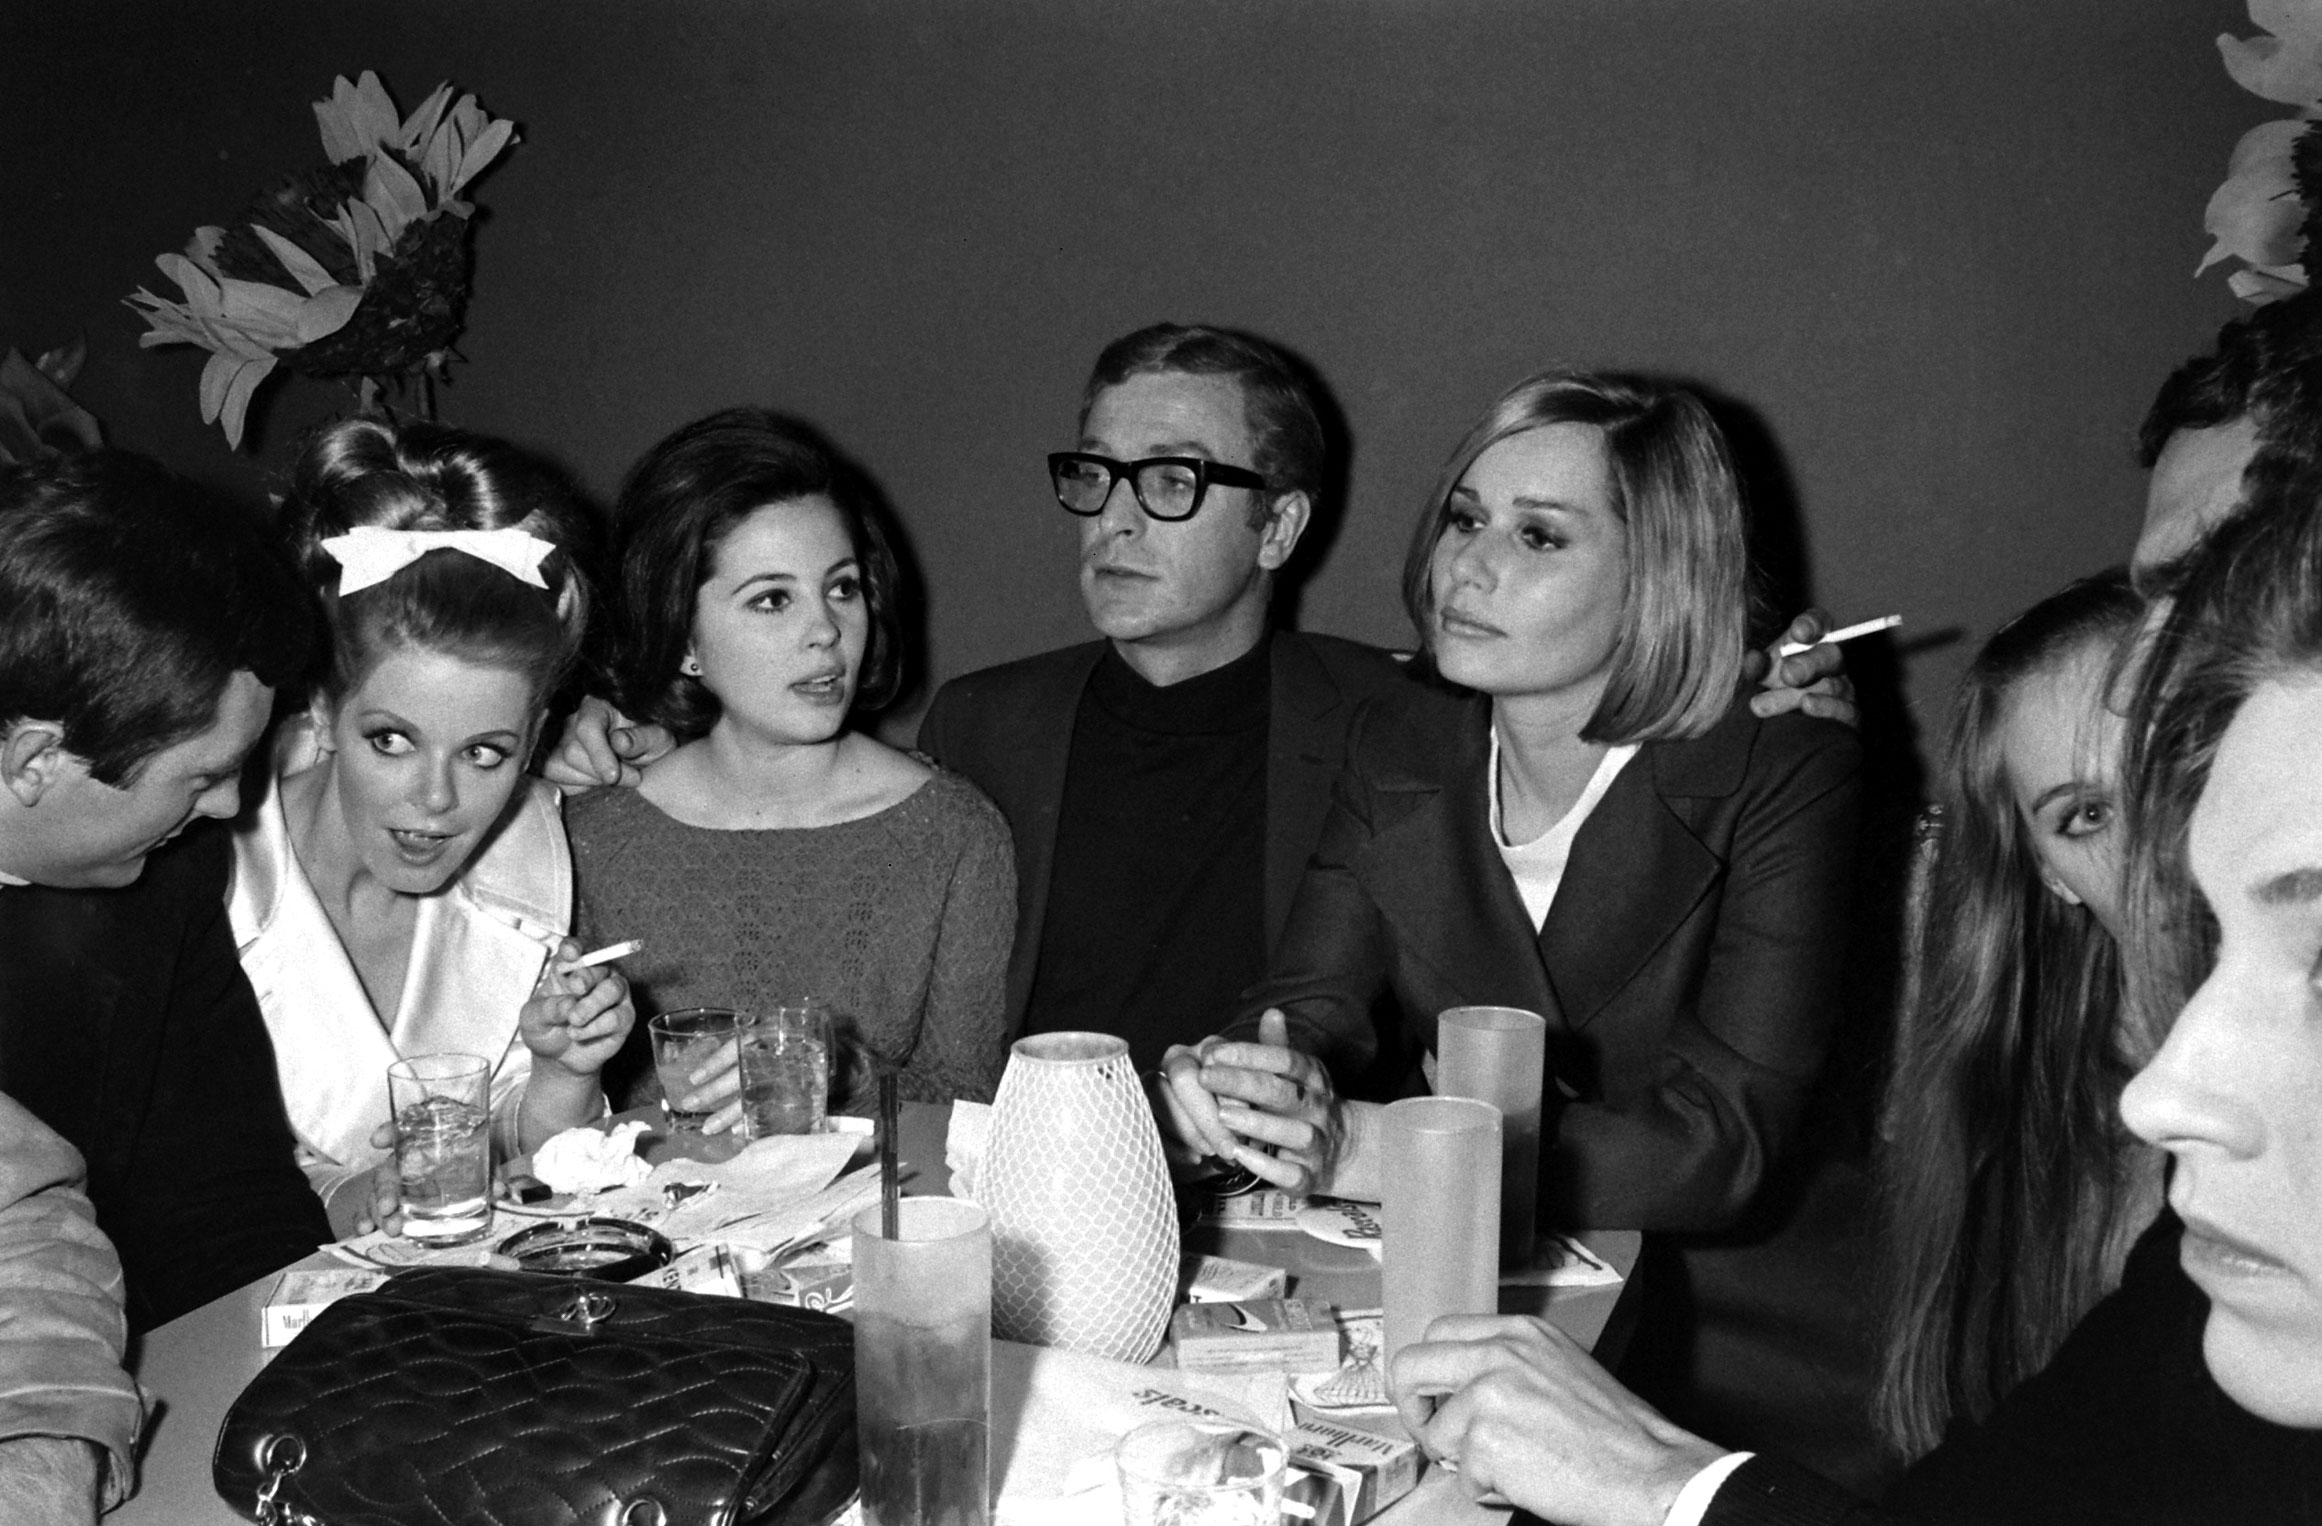 Michael Caine with friends, including the actress Sally Kellerman (on his left), in Los Angeles in 1966.